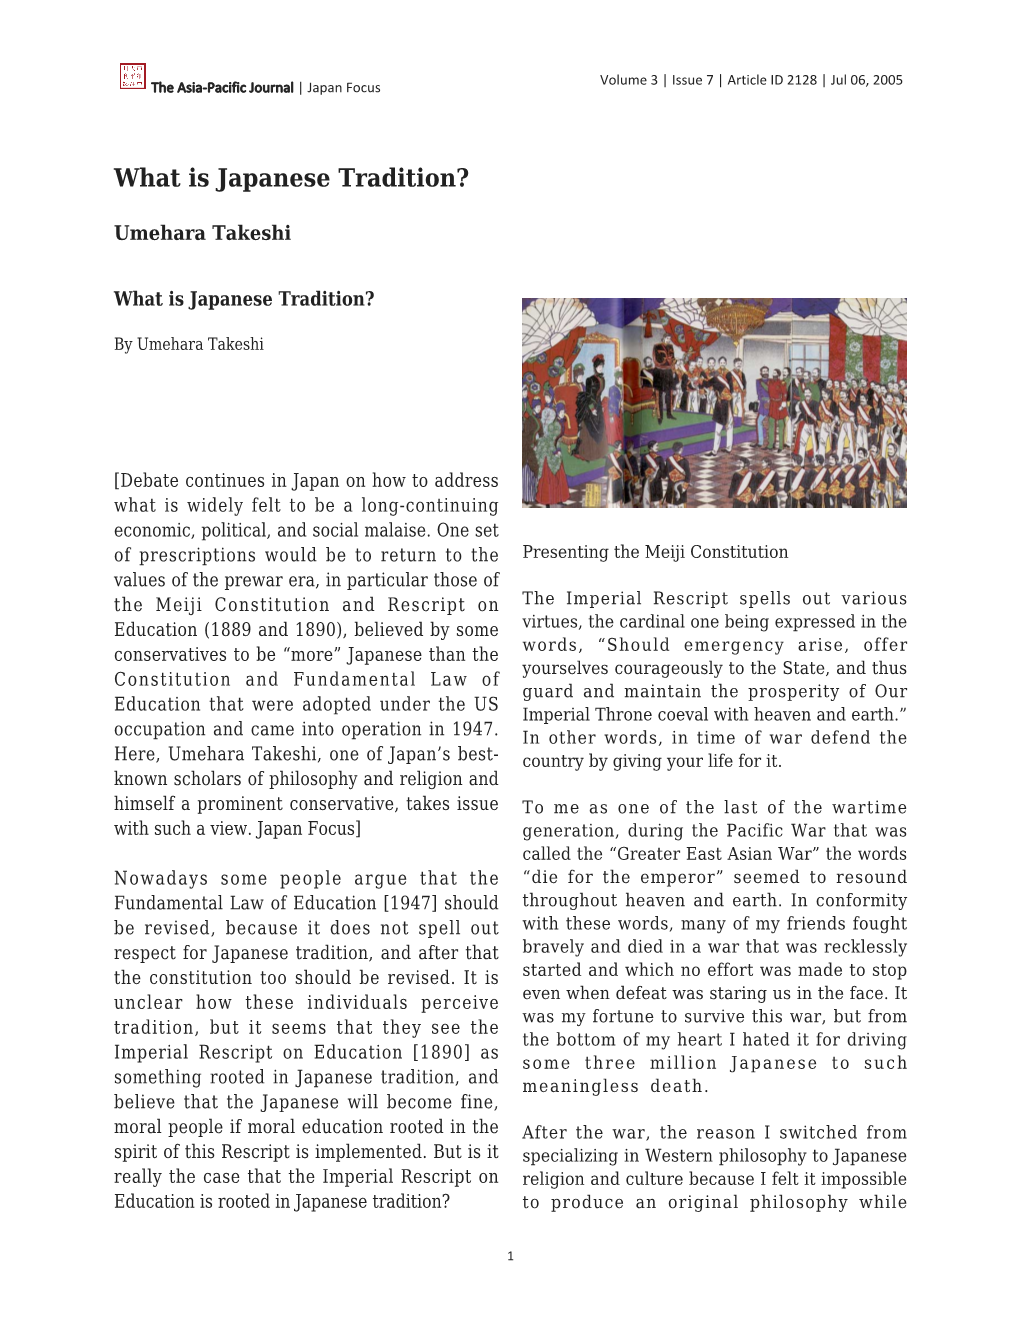 What Is Japanese Tradition?